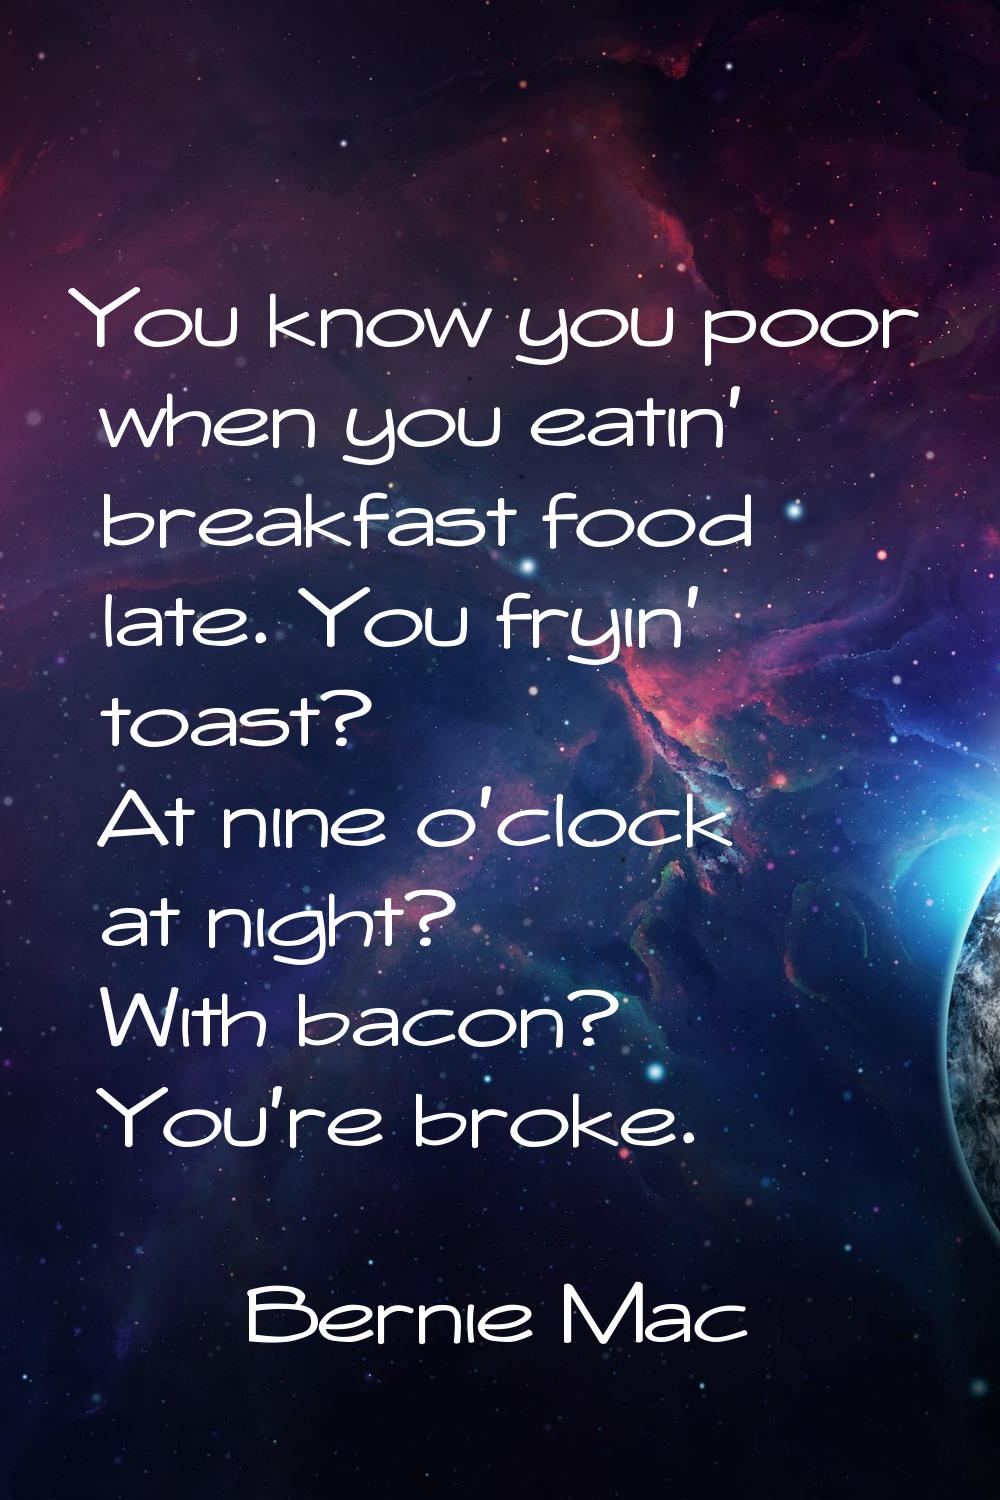 You know you poor when you eatin' breakfast food late. You fryin' toast? At nine o'clock at night? 